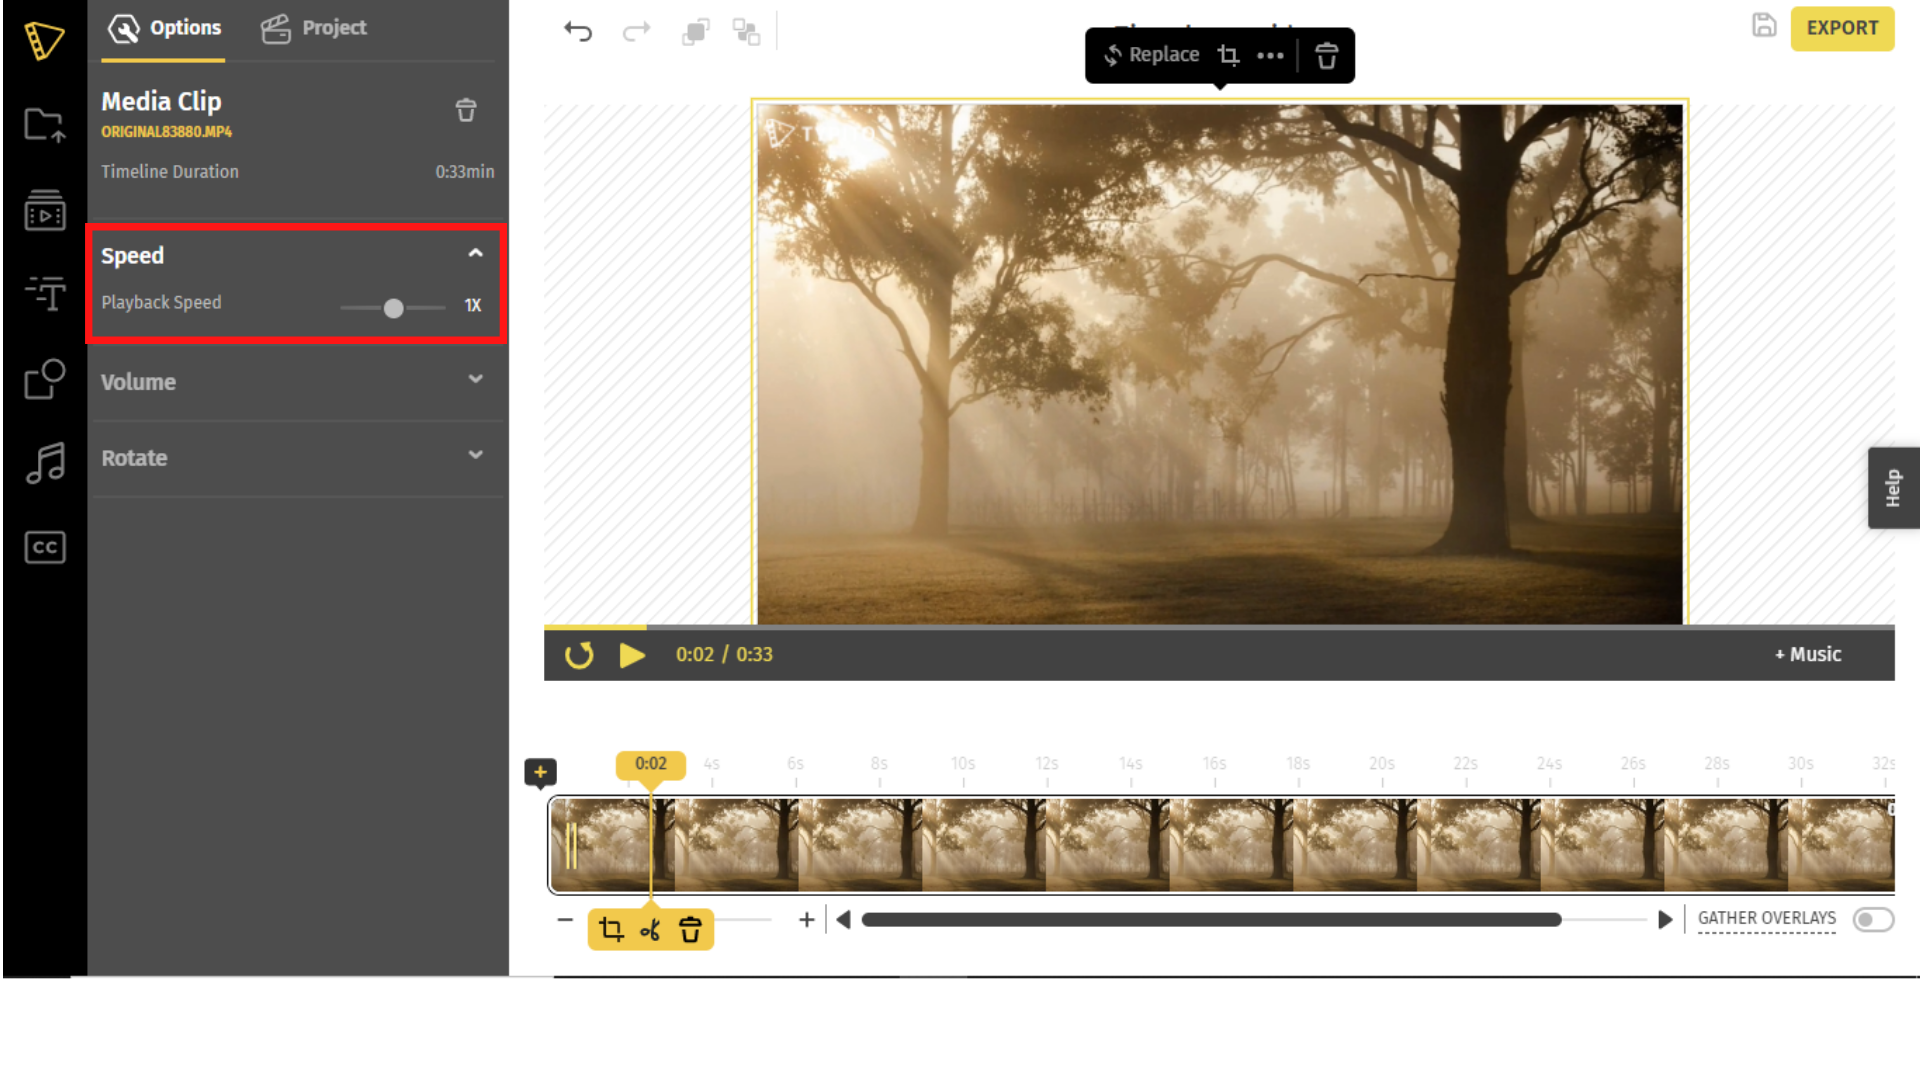 How to make a timelapse video -how to change the playback speed in Typito.